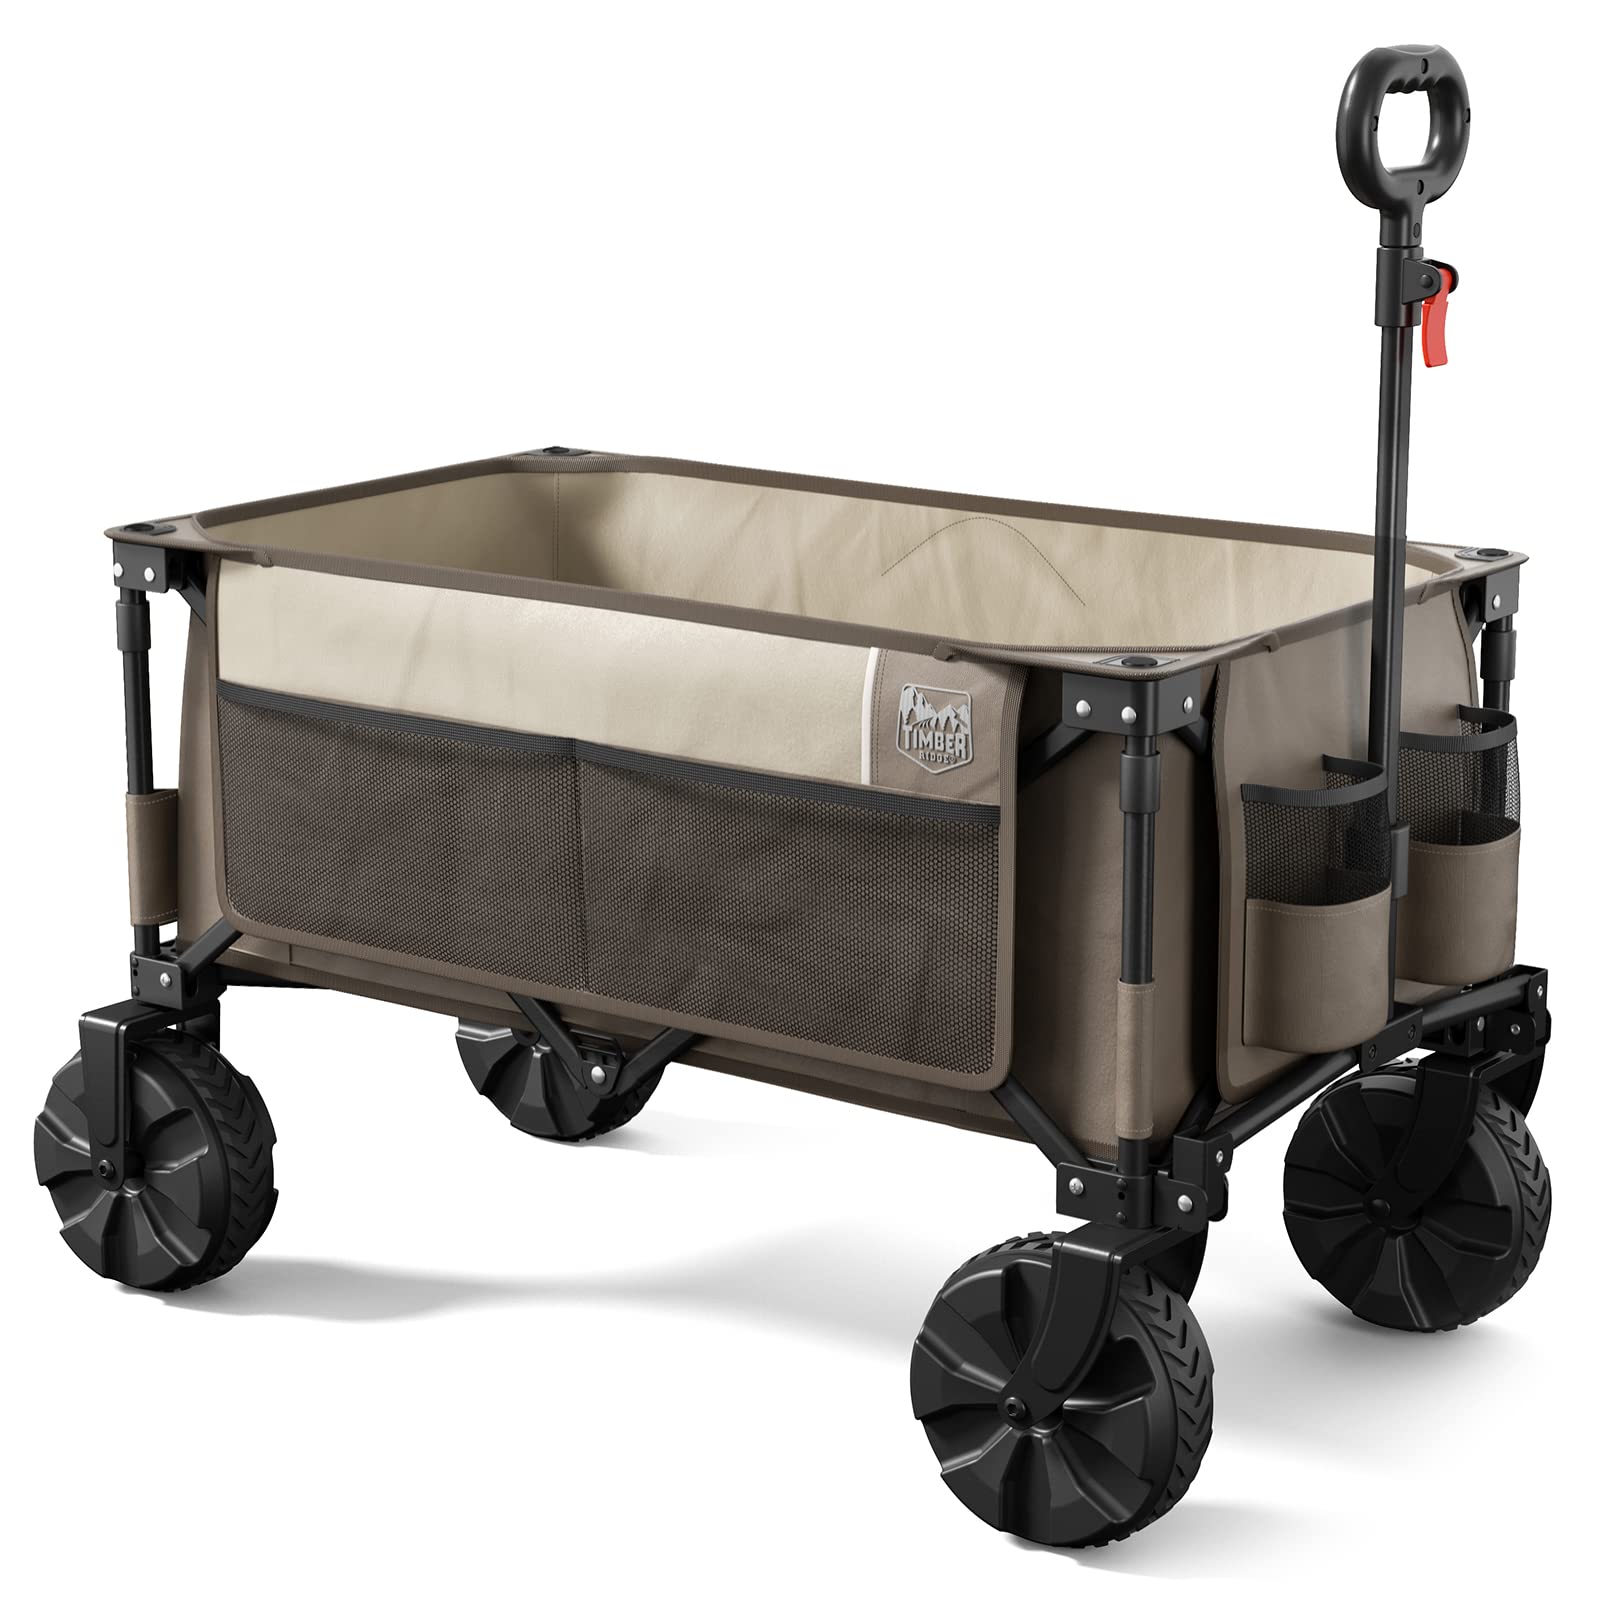 Timber Ridge Outdoor Collapsible Wagon Utility Folding Cart Heavy Duty All Terrain Wheels For Shopping Camping Garden With Side